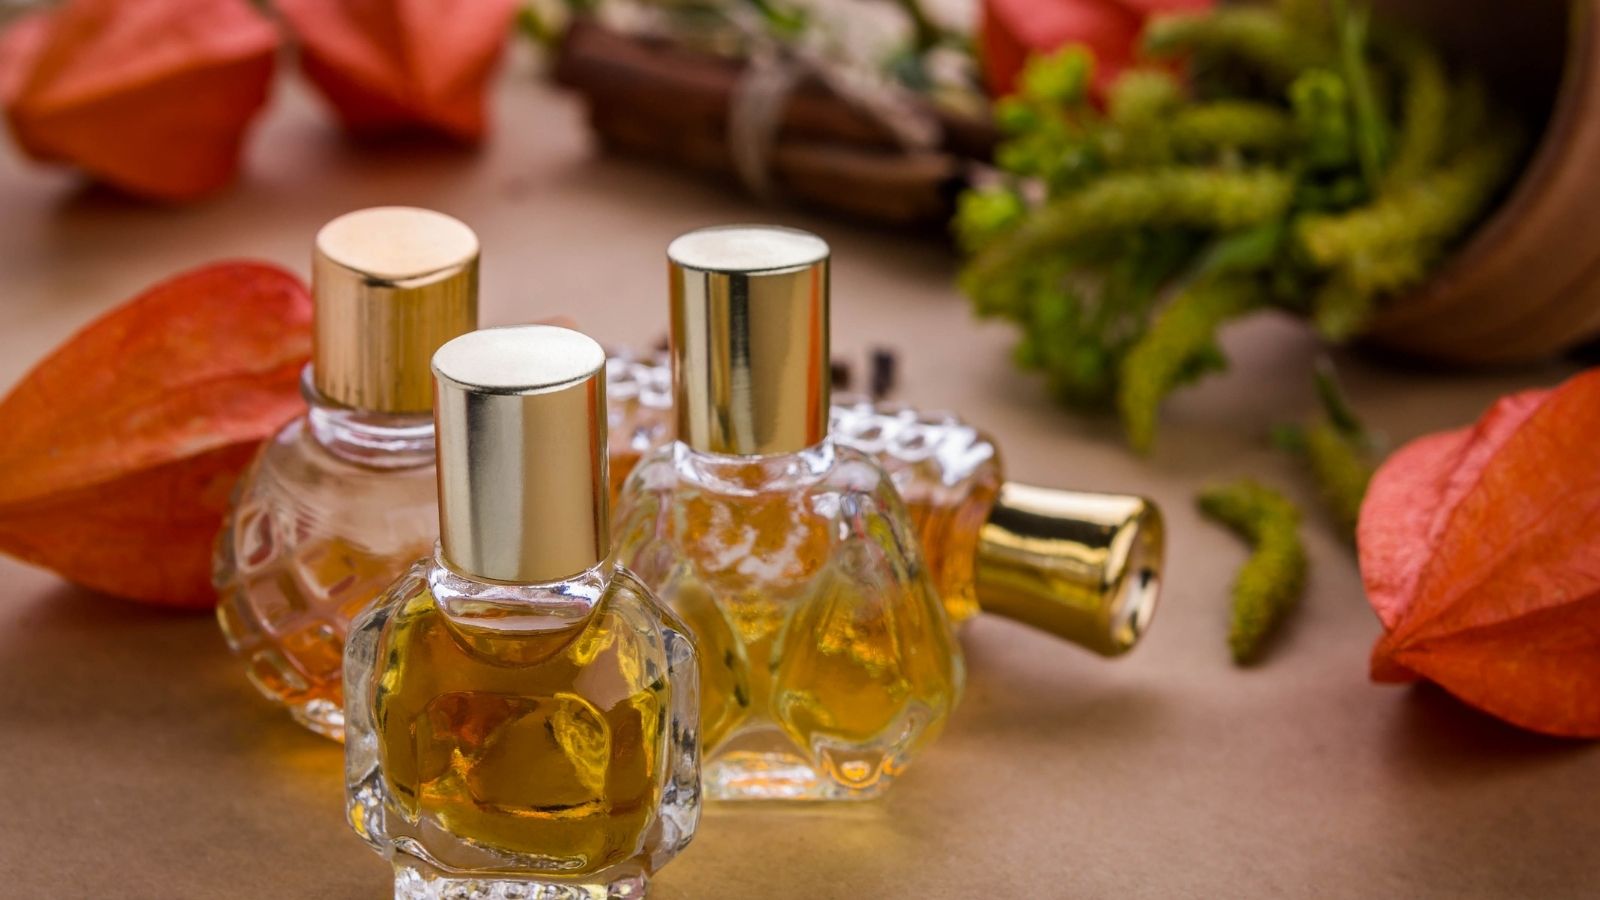 Keep your perfume bottles out of direct sunlight to prevent them from deteriorating.
